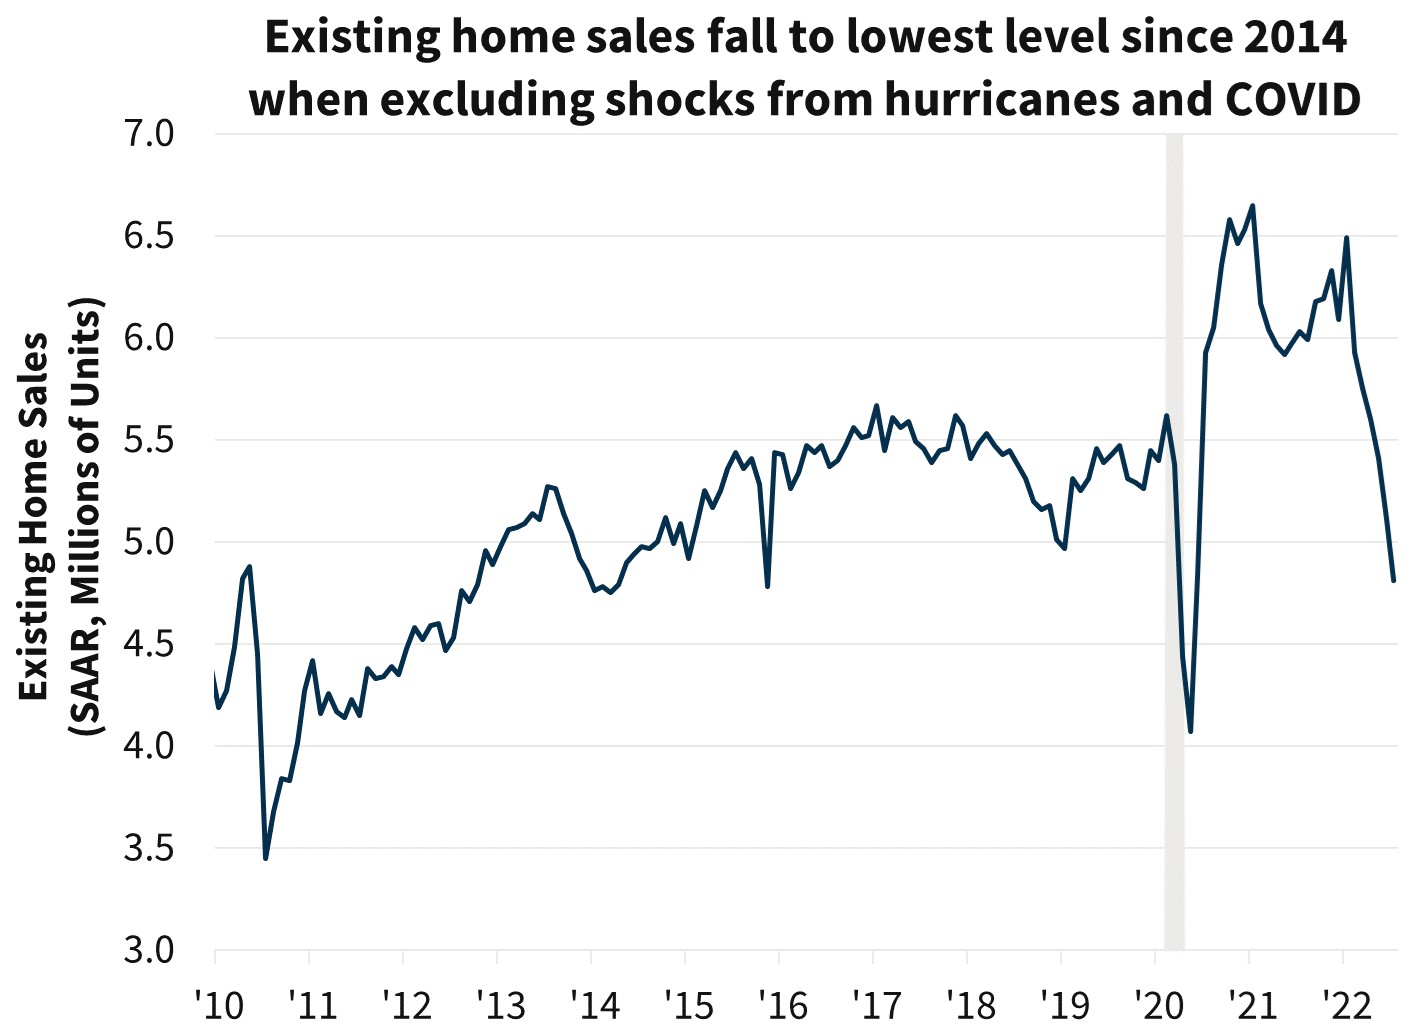  Existing home sales fall to lowest level since 2014, when excluding shocks from hurricanes and COVID
